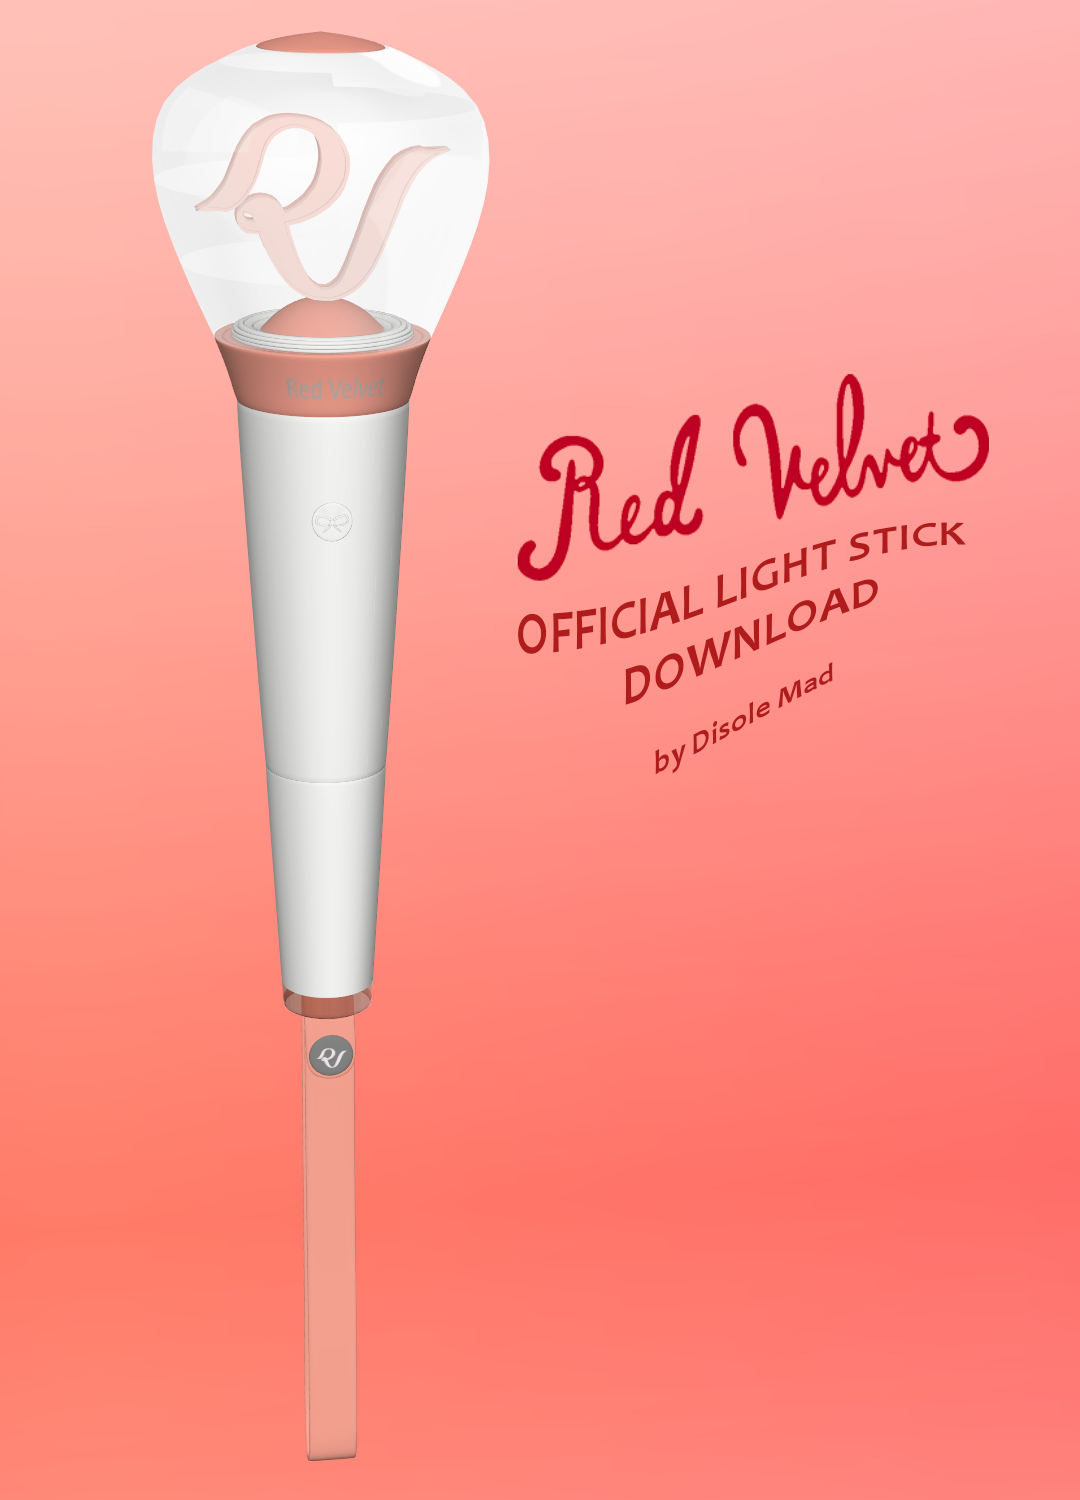 MMD] Red Lightstick (DOWNLOAD) by DisoleMad on DeviantArt